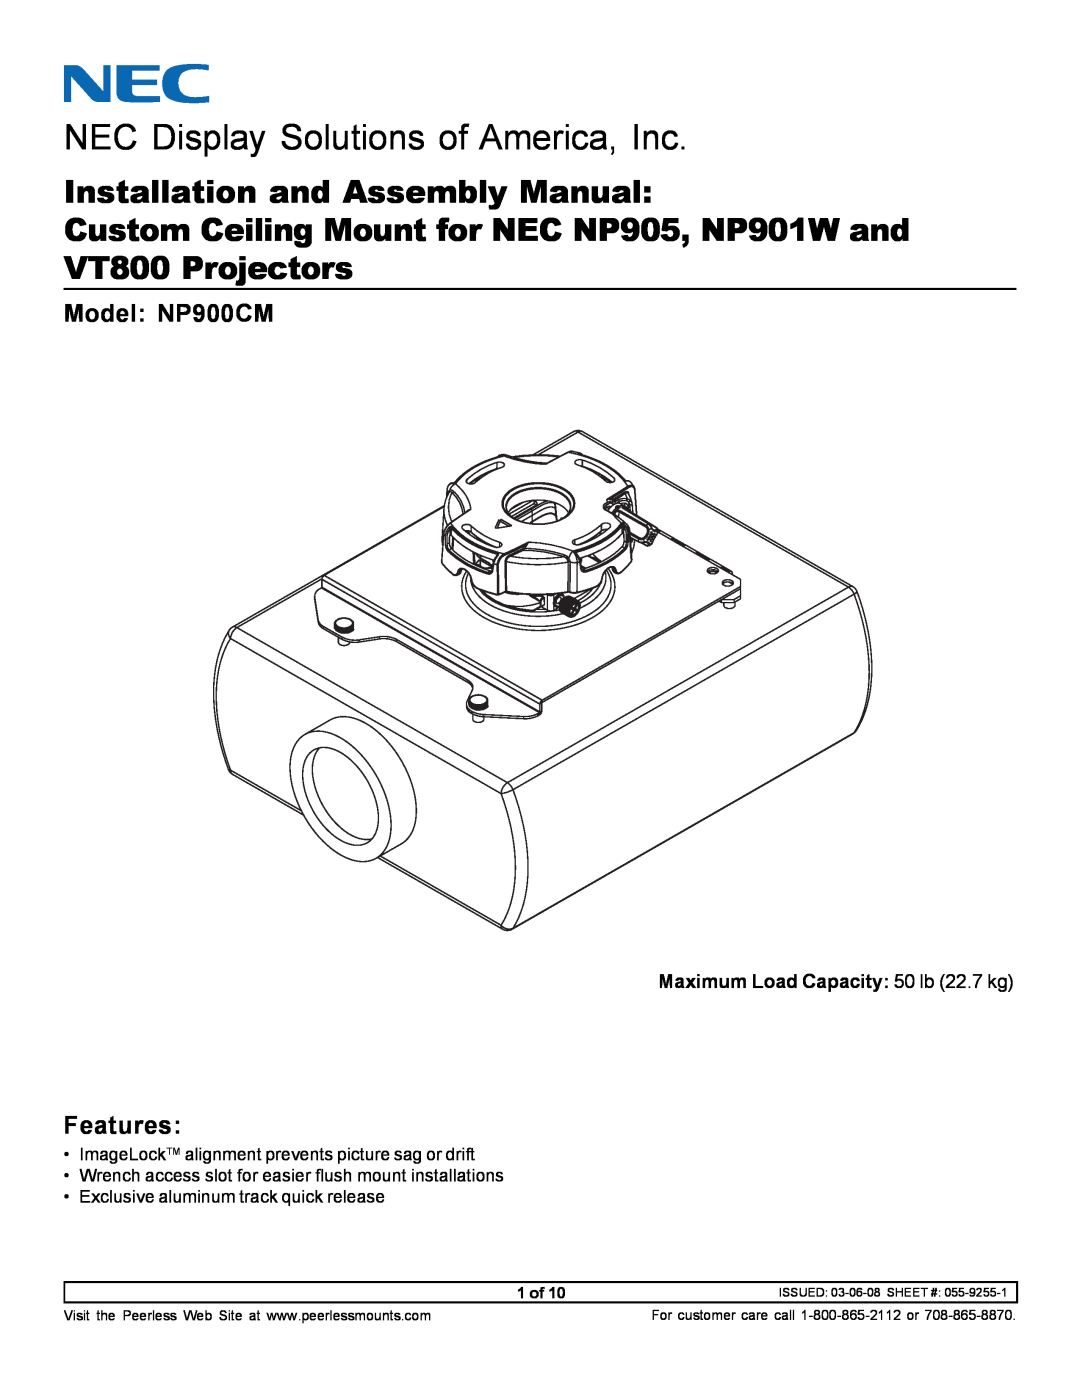 NEC NP900CM manual Installation and Assembly Manual, Custom Ceiling Mount for NEC NP905, NP901W and VT800 Projectors, 1 of 